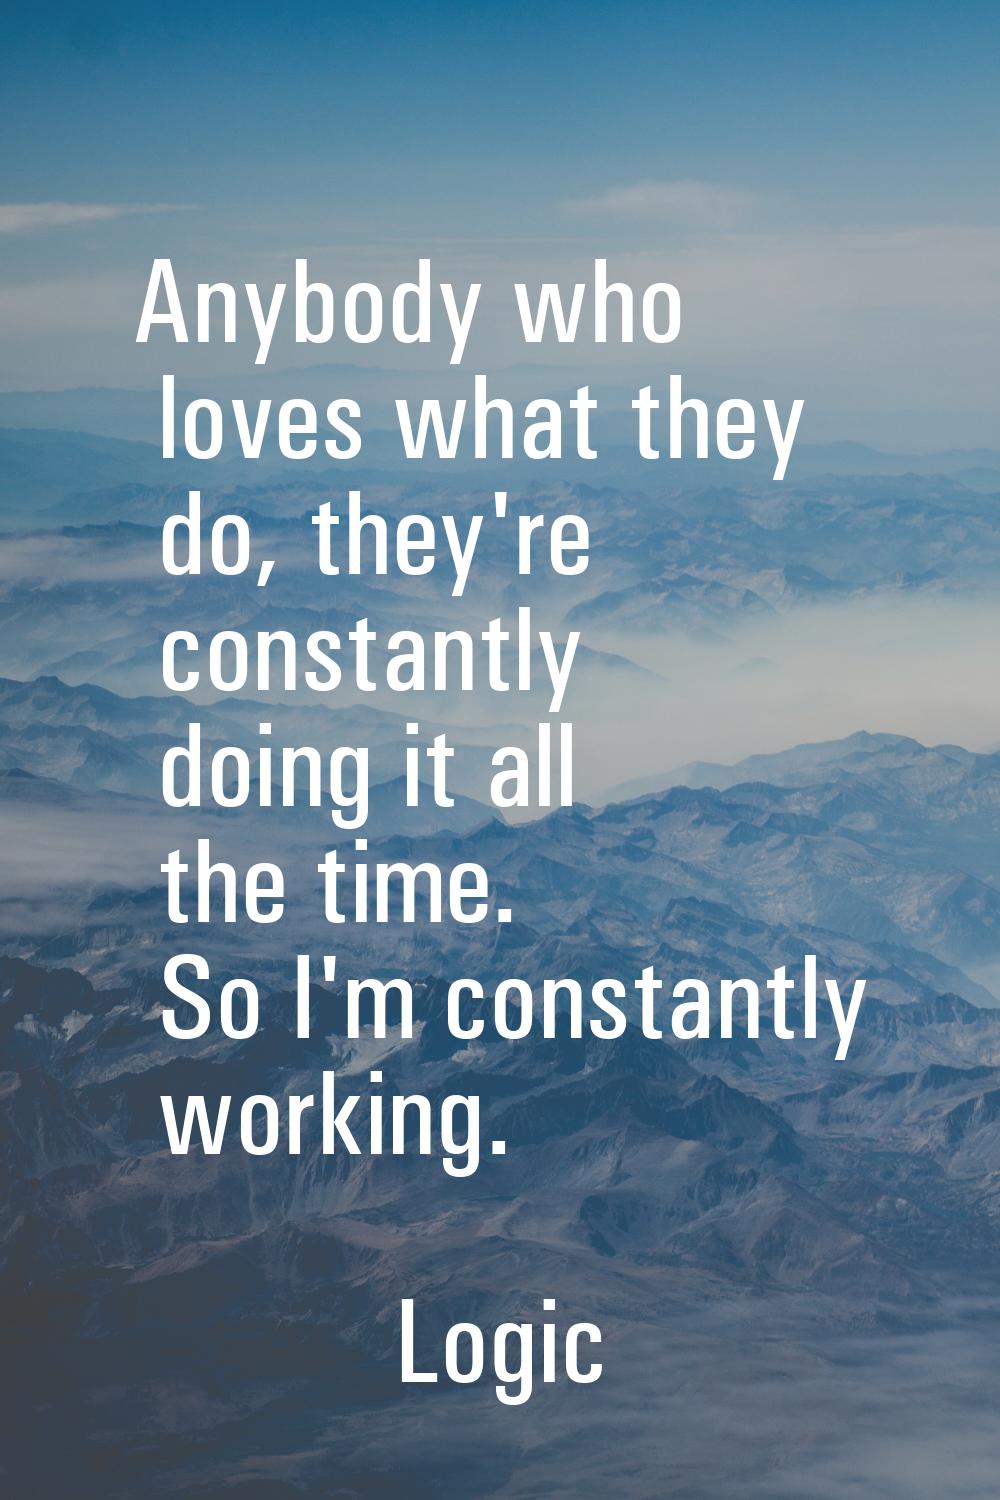 Anybody who loves what they do, they're constantly doing it all the time. So I'm constantly working